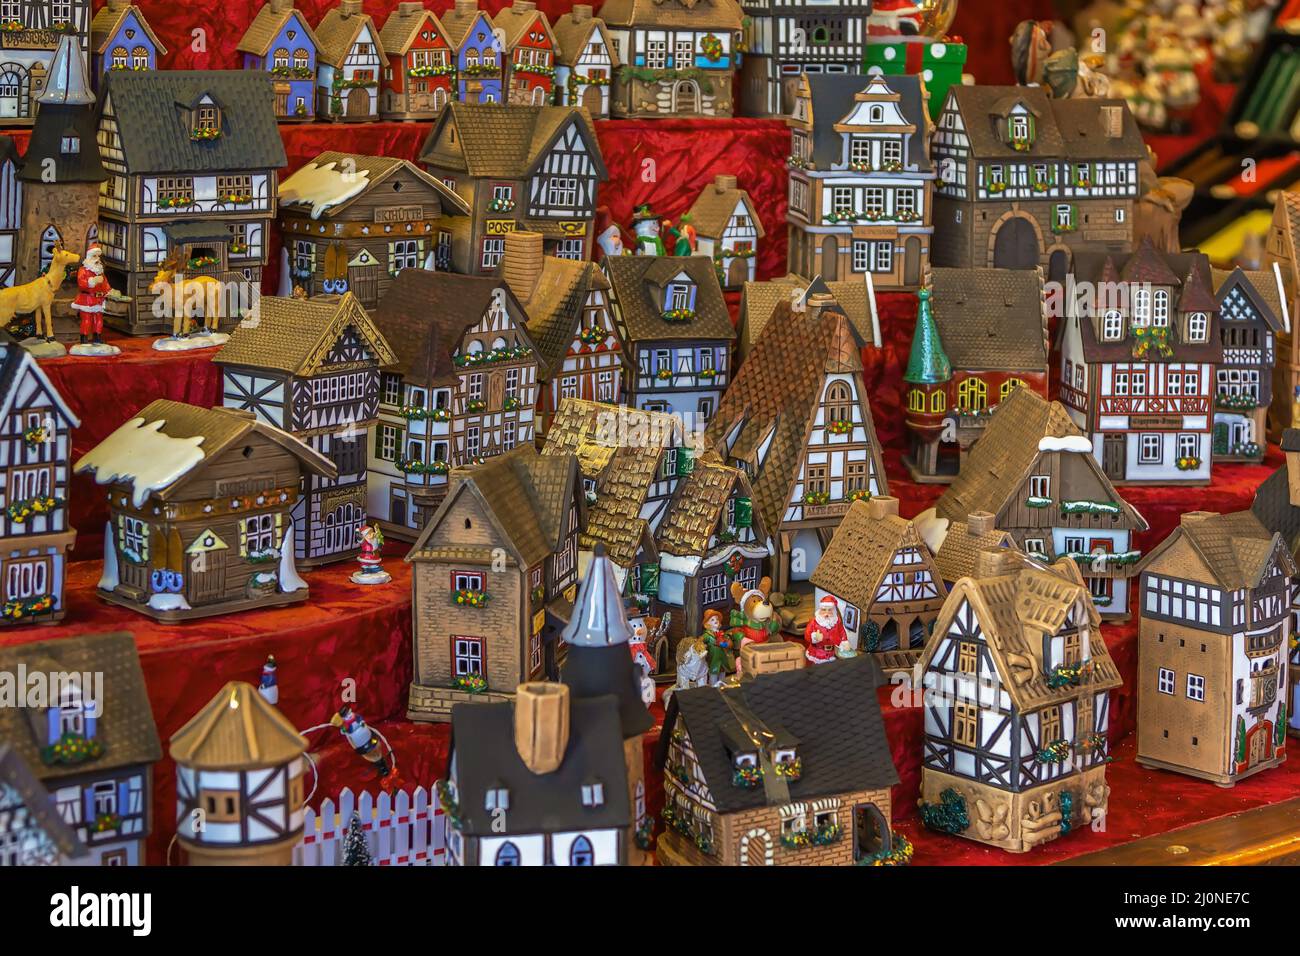 Miniature houses at the Christmas market, Germany Stock Photo